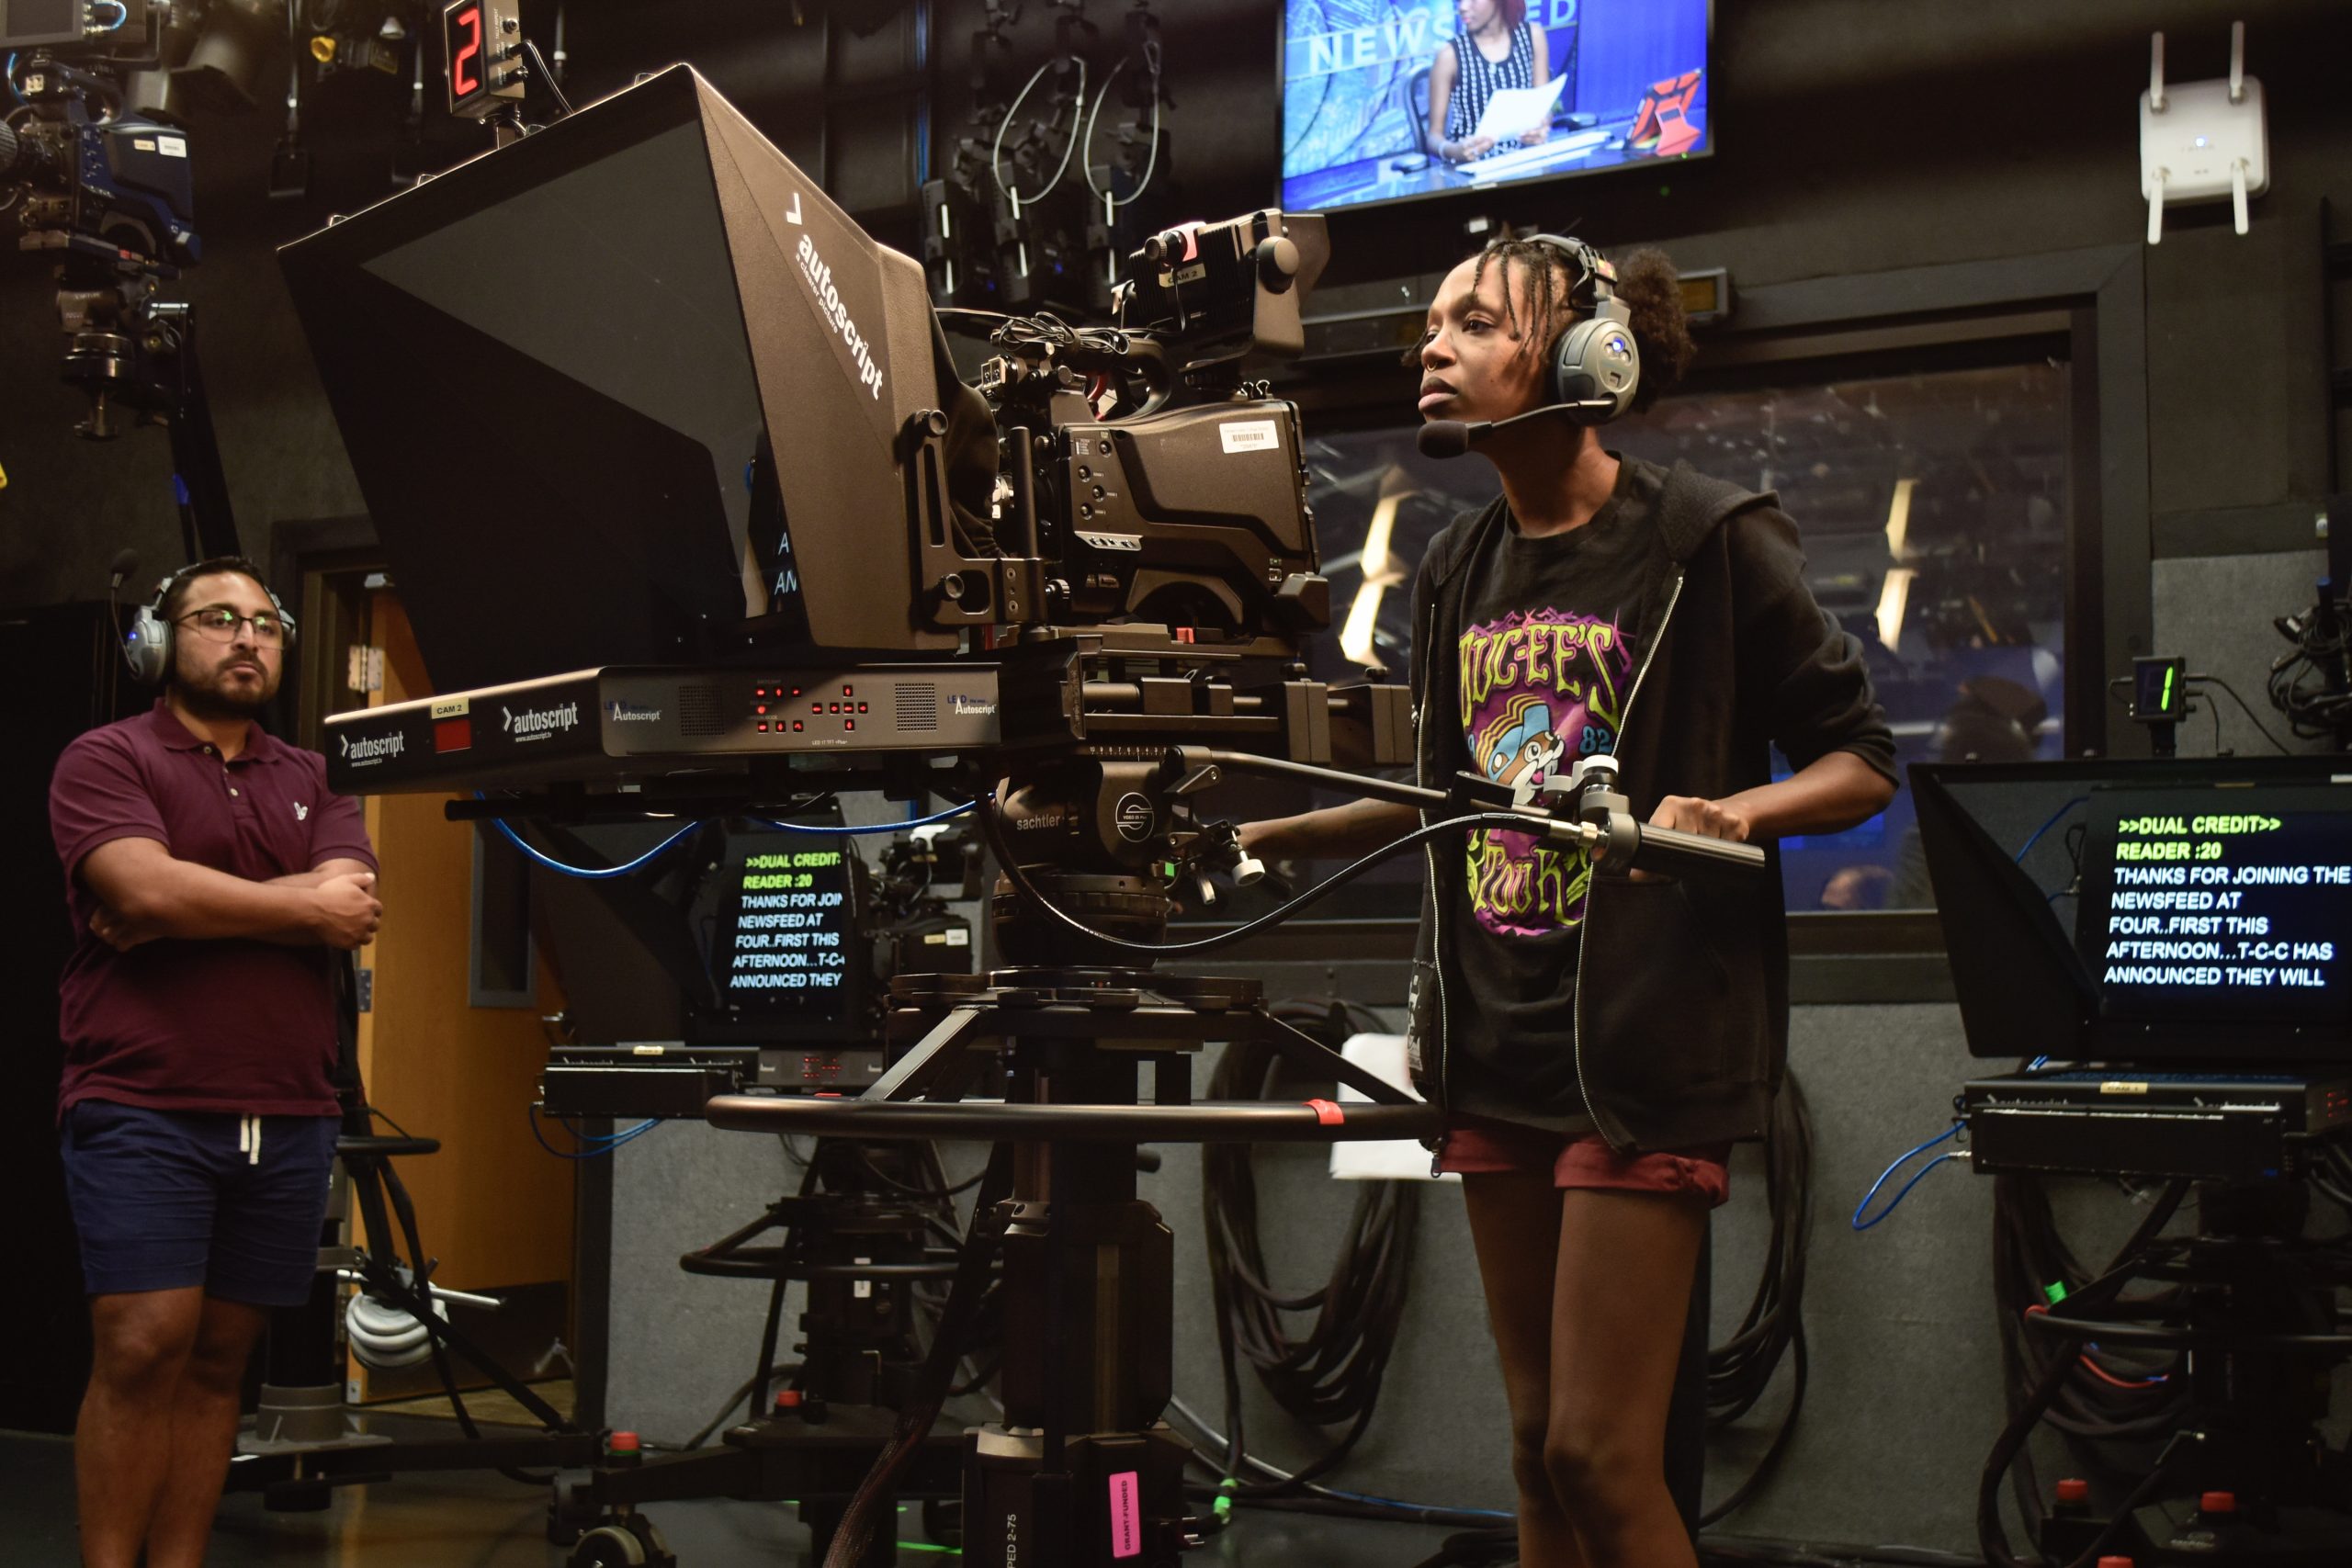 Alex Hoben/The Collegian NE student Rachael Adams operates one of the TV cameras during the TCC Newsfeed broadcast. The Newsfeed is run by the RTVF department and is open to student volunteers. It is a way for students to get on-the-job experience for newscasts.